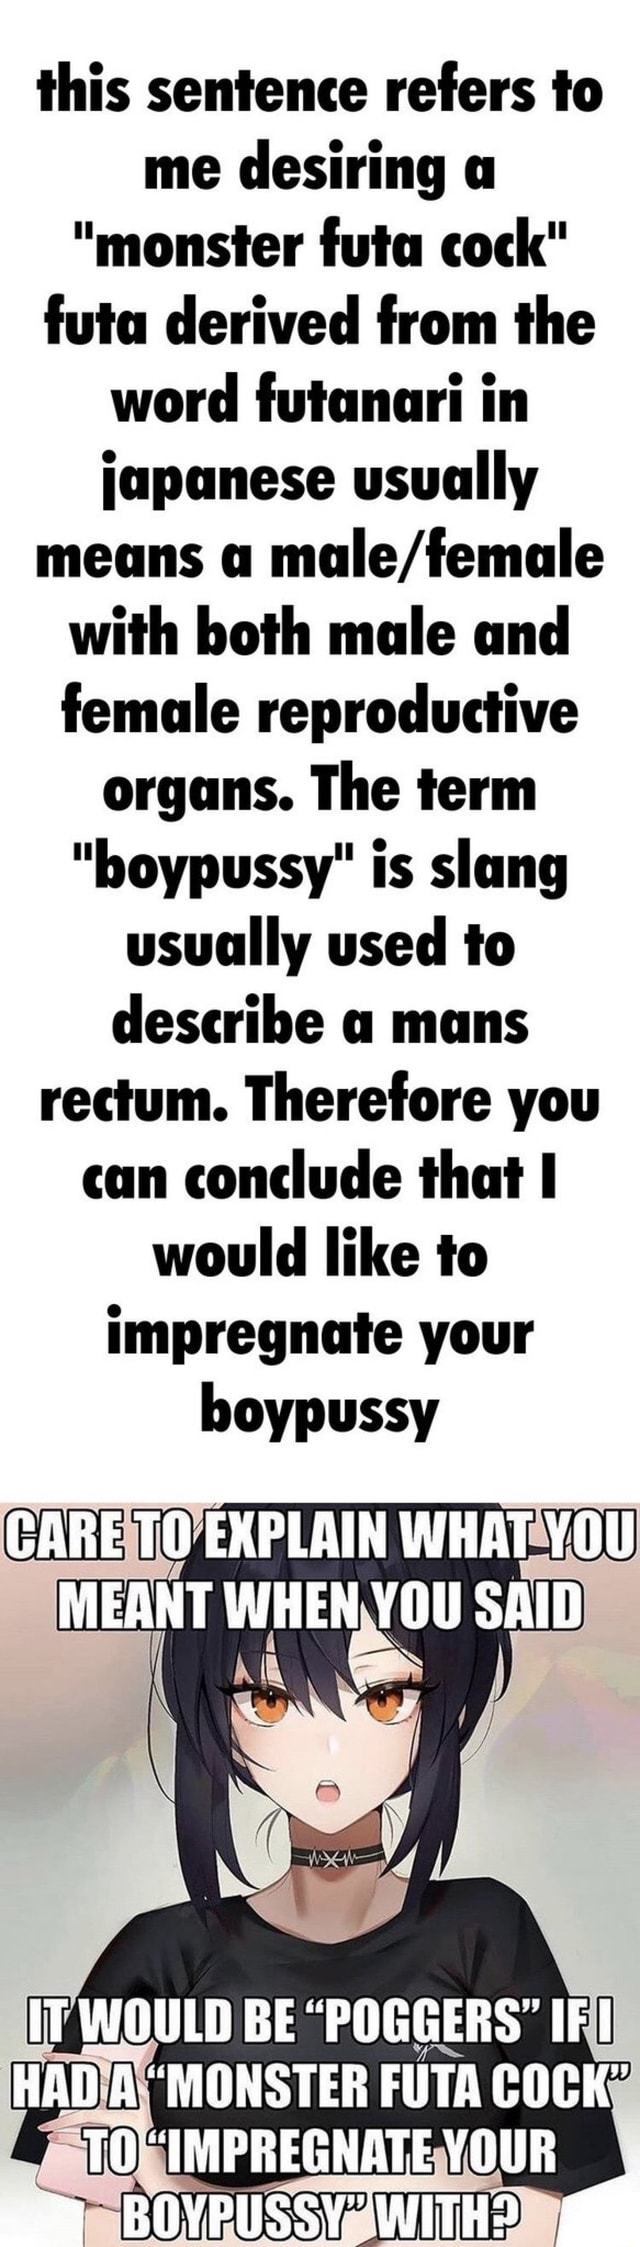 This sentence refers to me desiring a monster futa cock futa derived from  the word futanari in japanese usually means a with both male and female  reproductive organs. The term boypussy is